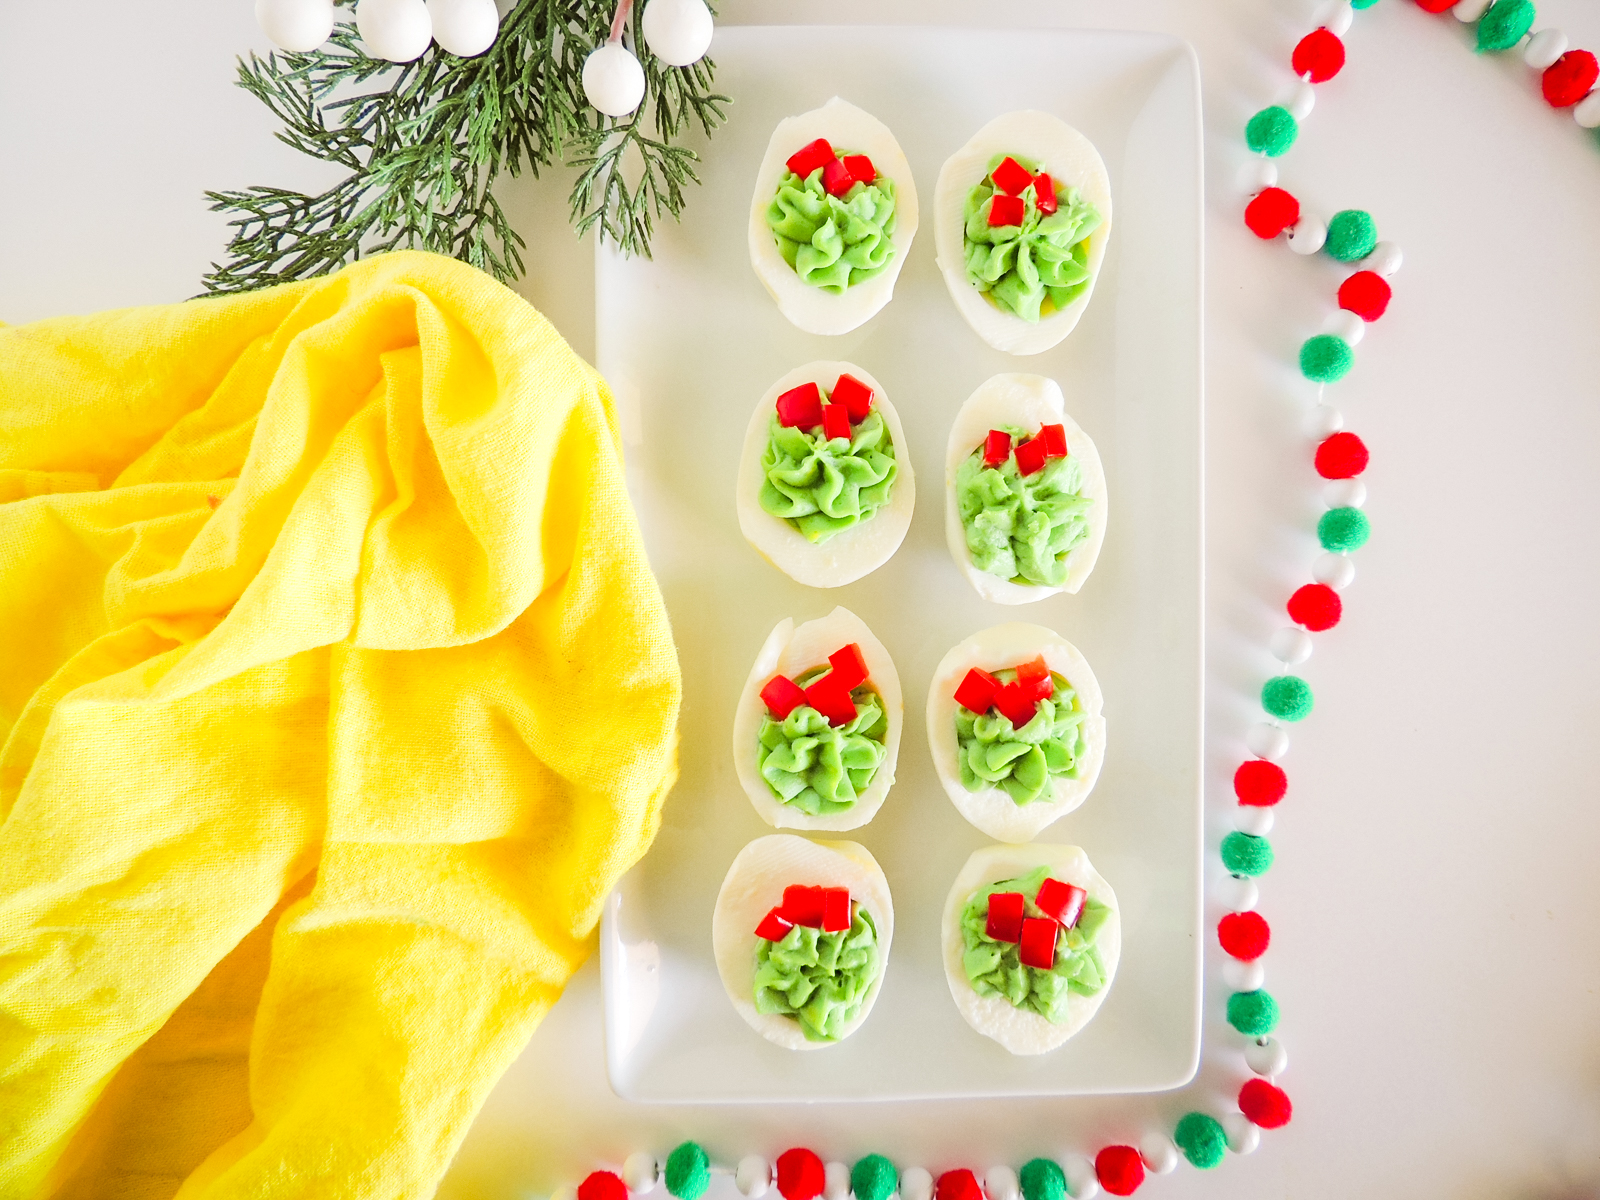 A tray of Christmas deviled eggs with a yellow towel.